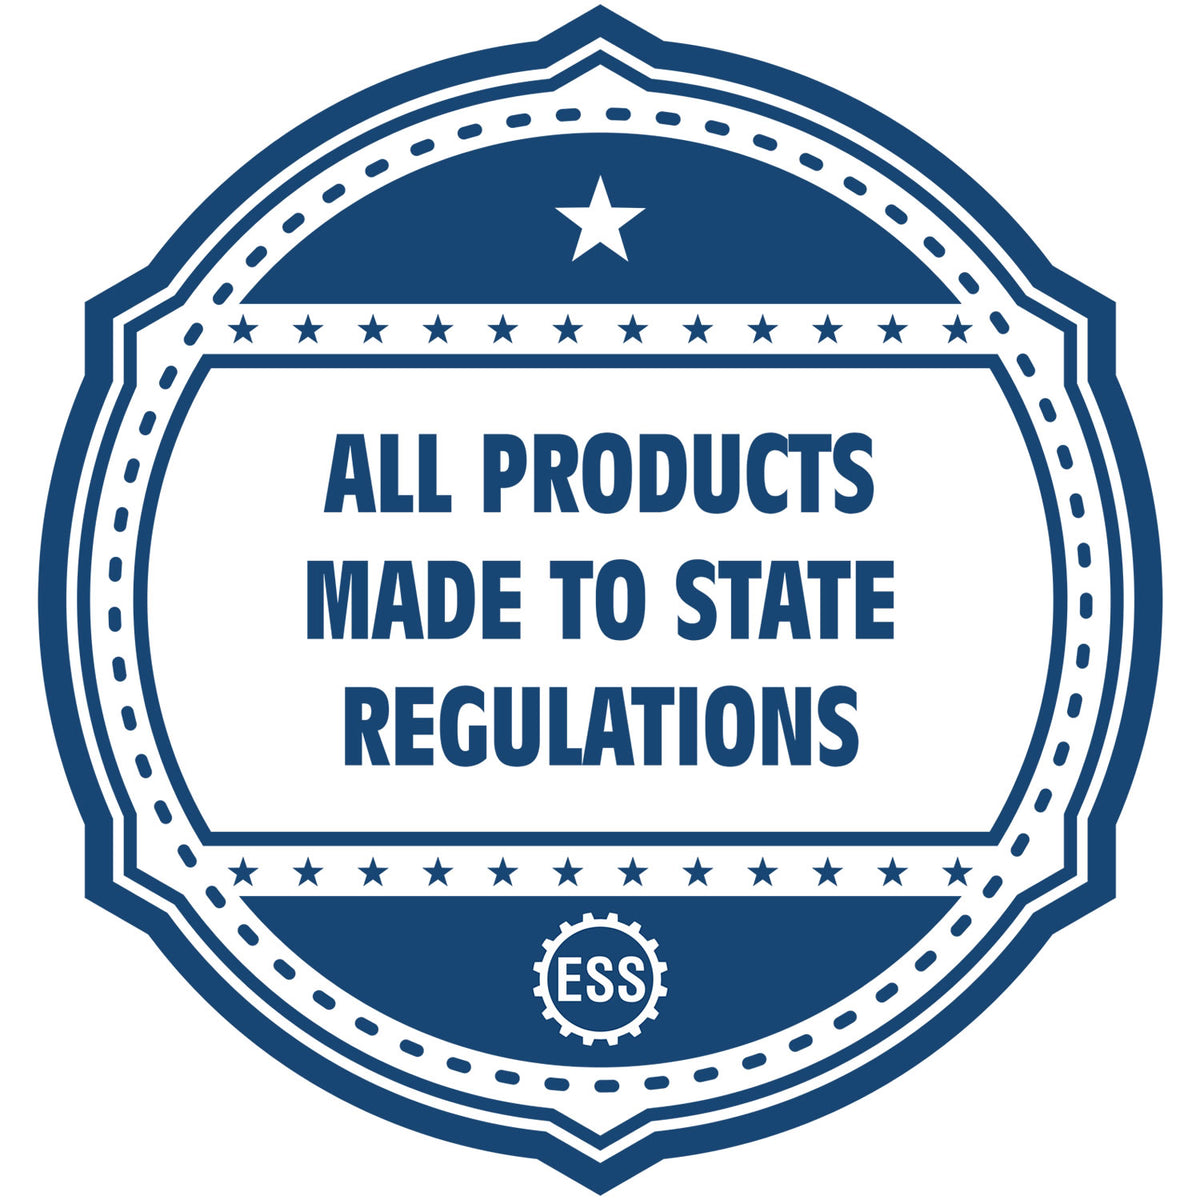 An icon or badge element for the Idaho Desk Surveyor Seal Embosser showing that this product is made in compliance with state regulations.